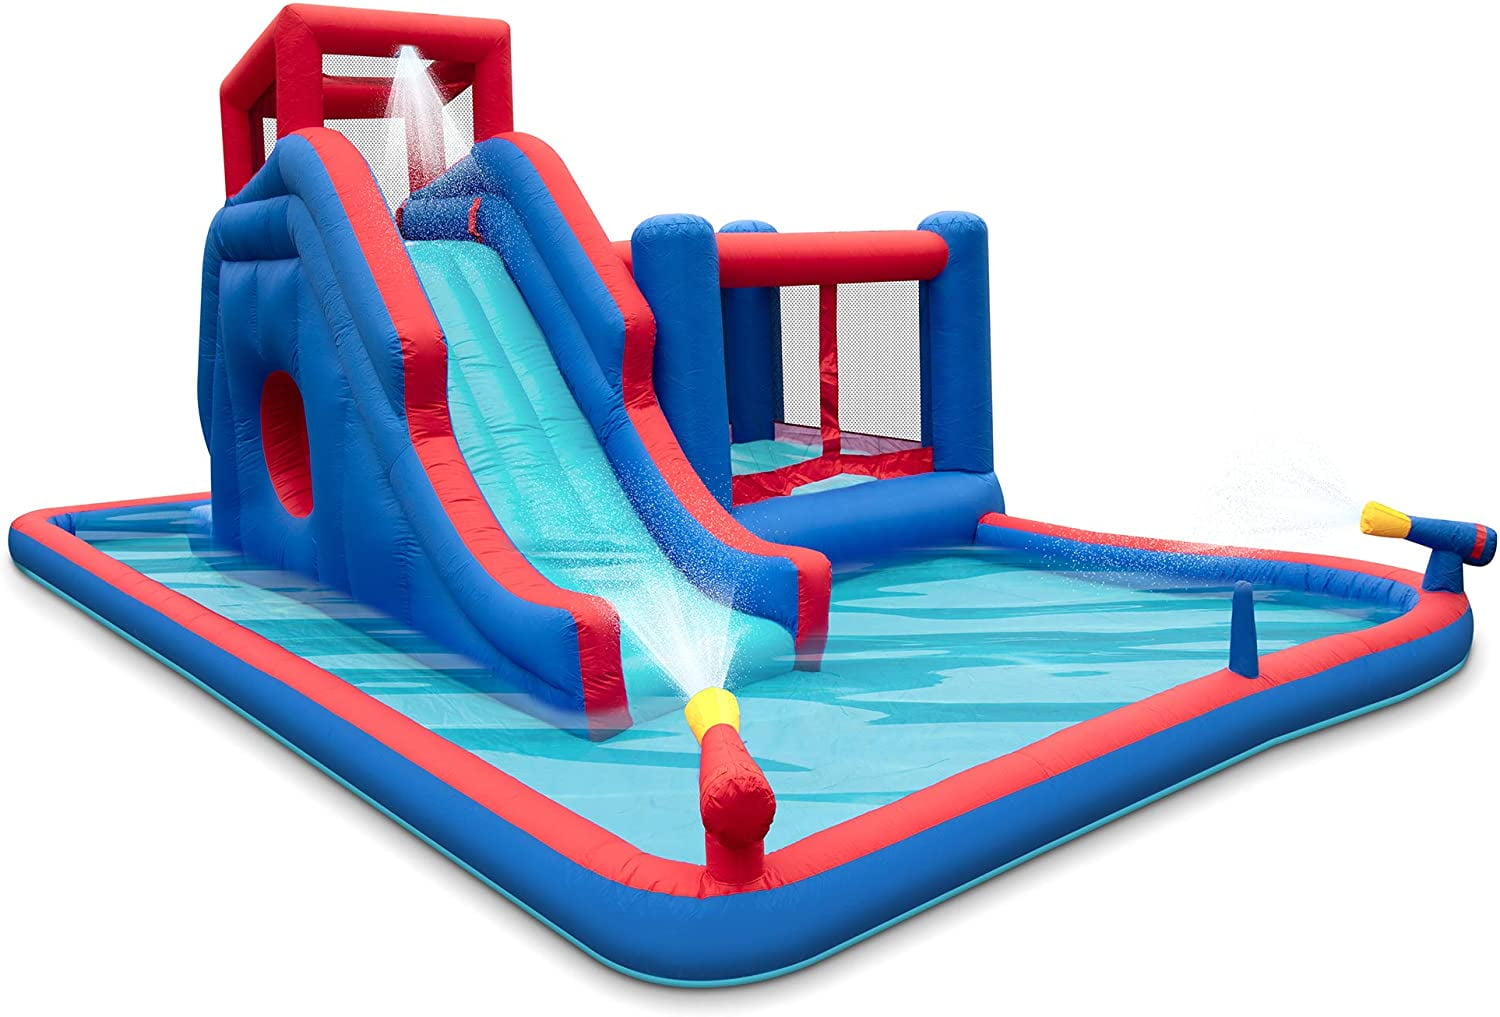 Kids Inflatable Water Park Bounce House Play w/Climb Wall Splash Pool 2 Slides 